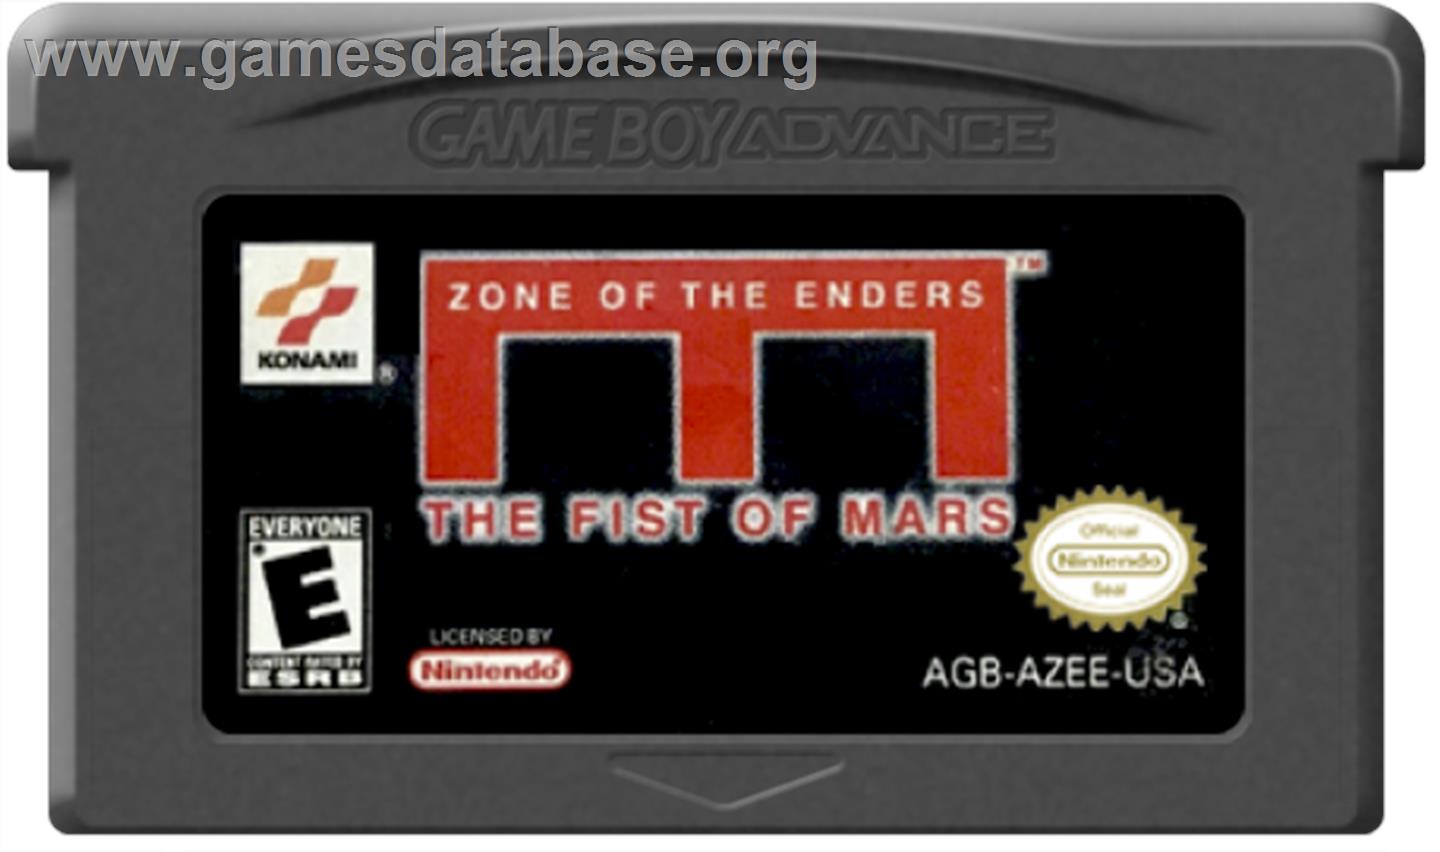 Zone of the Enders: The Fist of Mars - Nintendo Game Boy Advance - Artwork - Cartridge